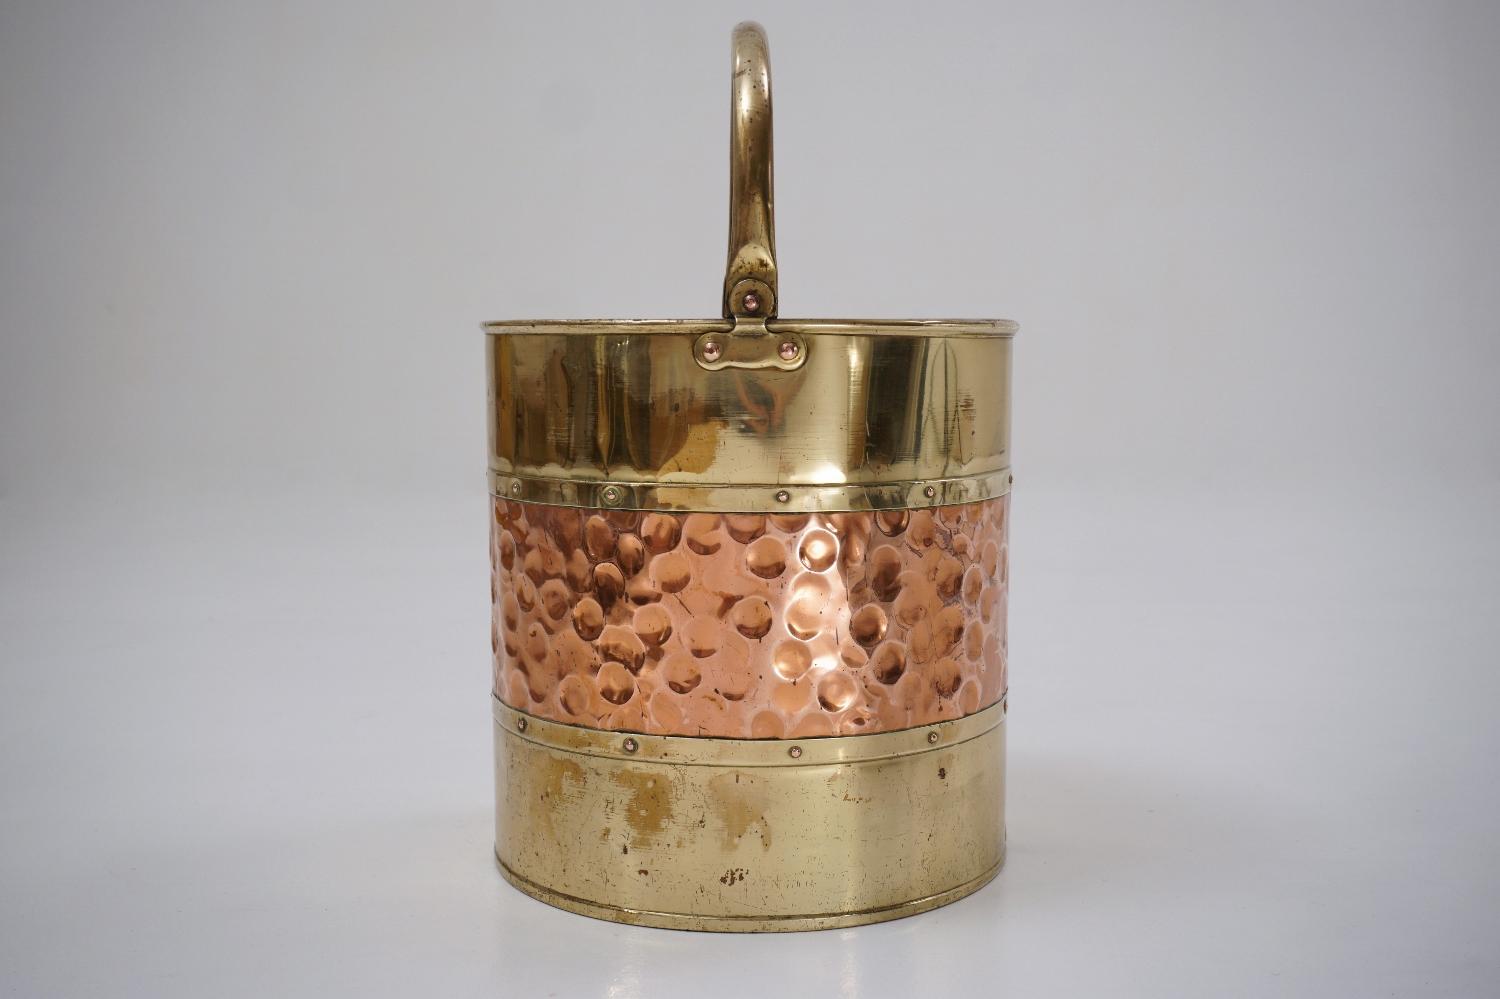 Antique Brass Bucket/Bin 'Coal Scuttle' with Copper Banding, circa 1900s English For Sale 1